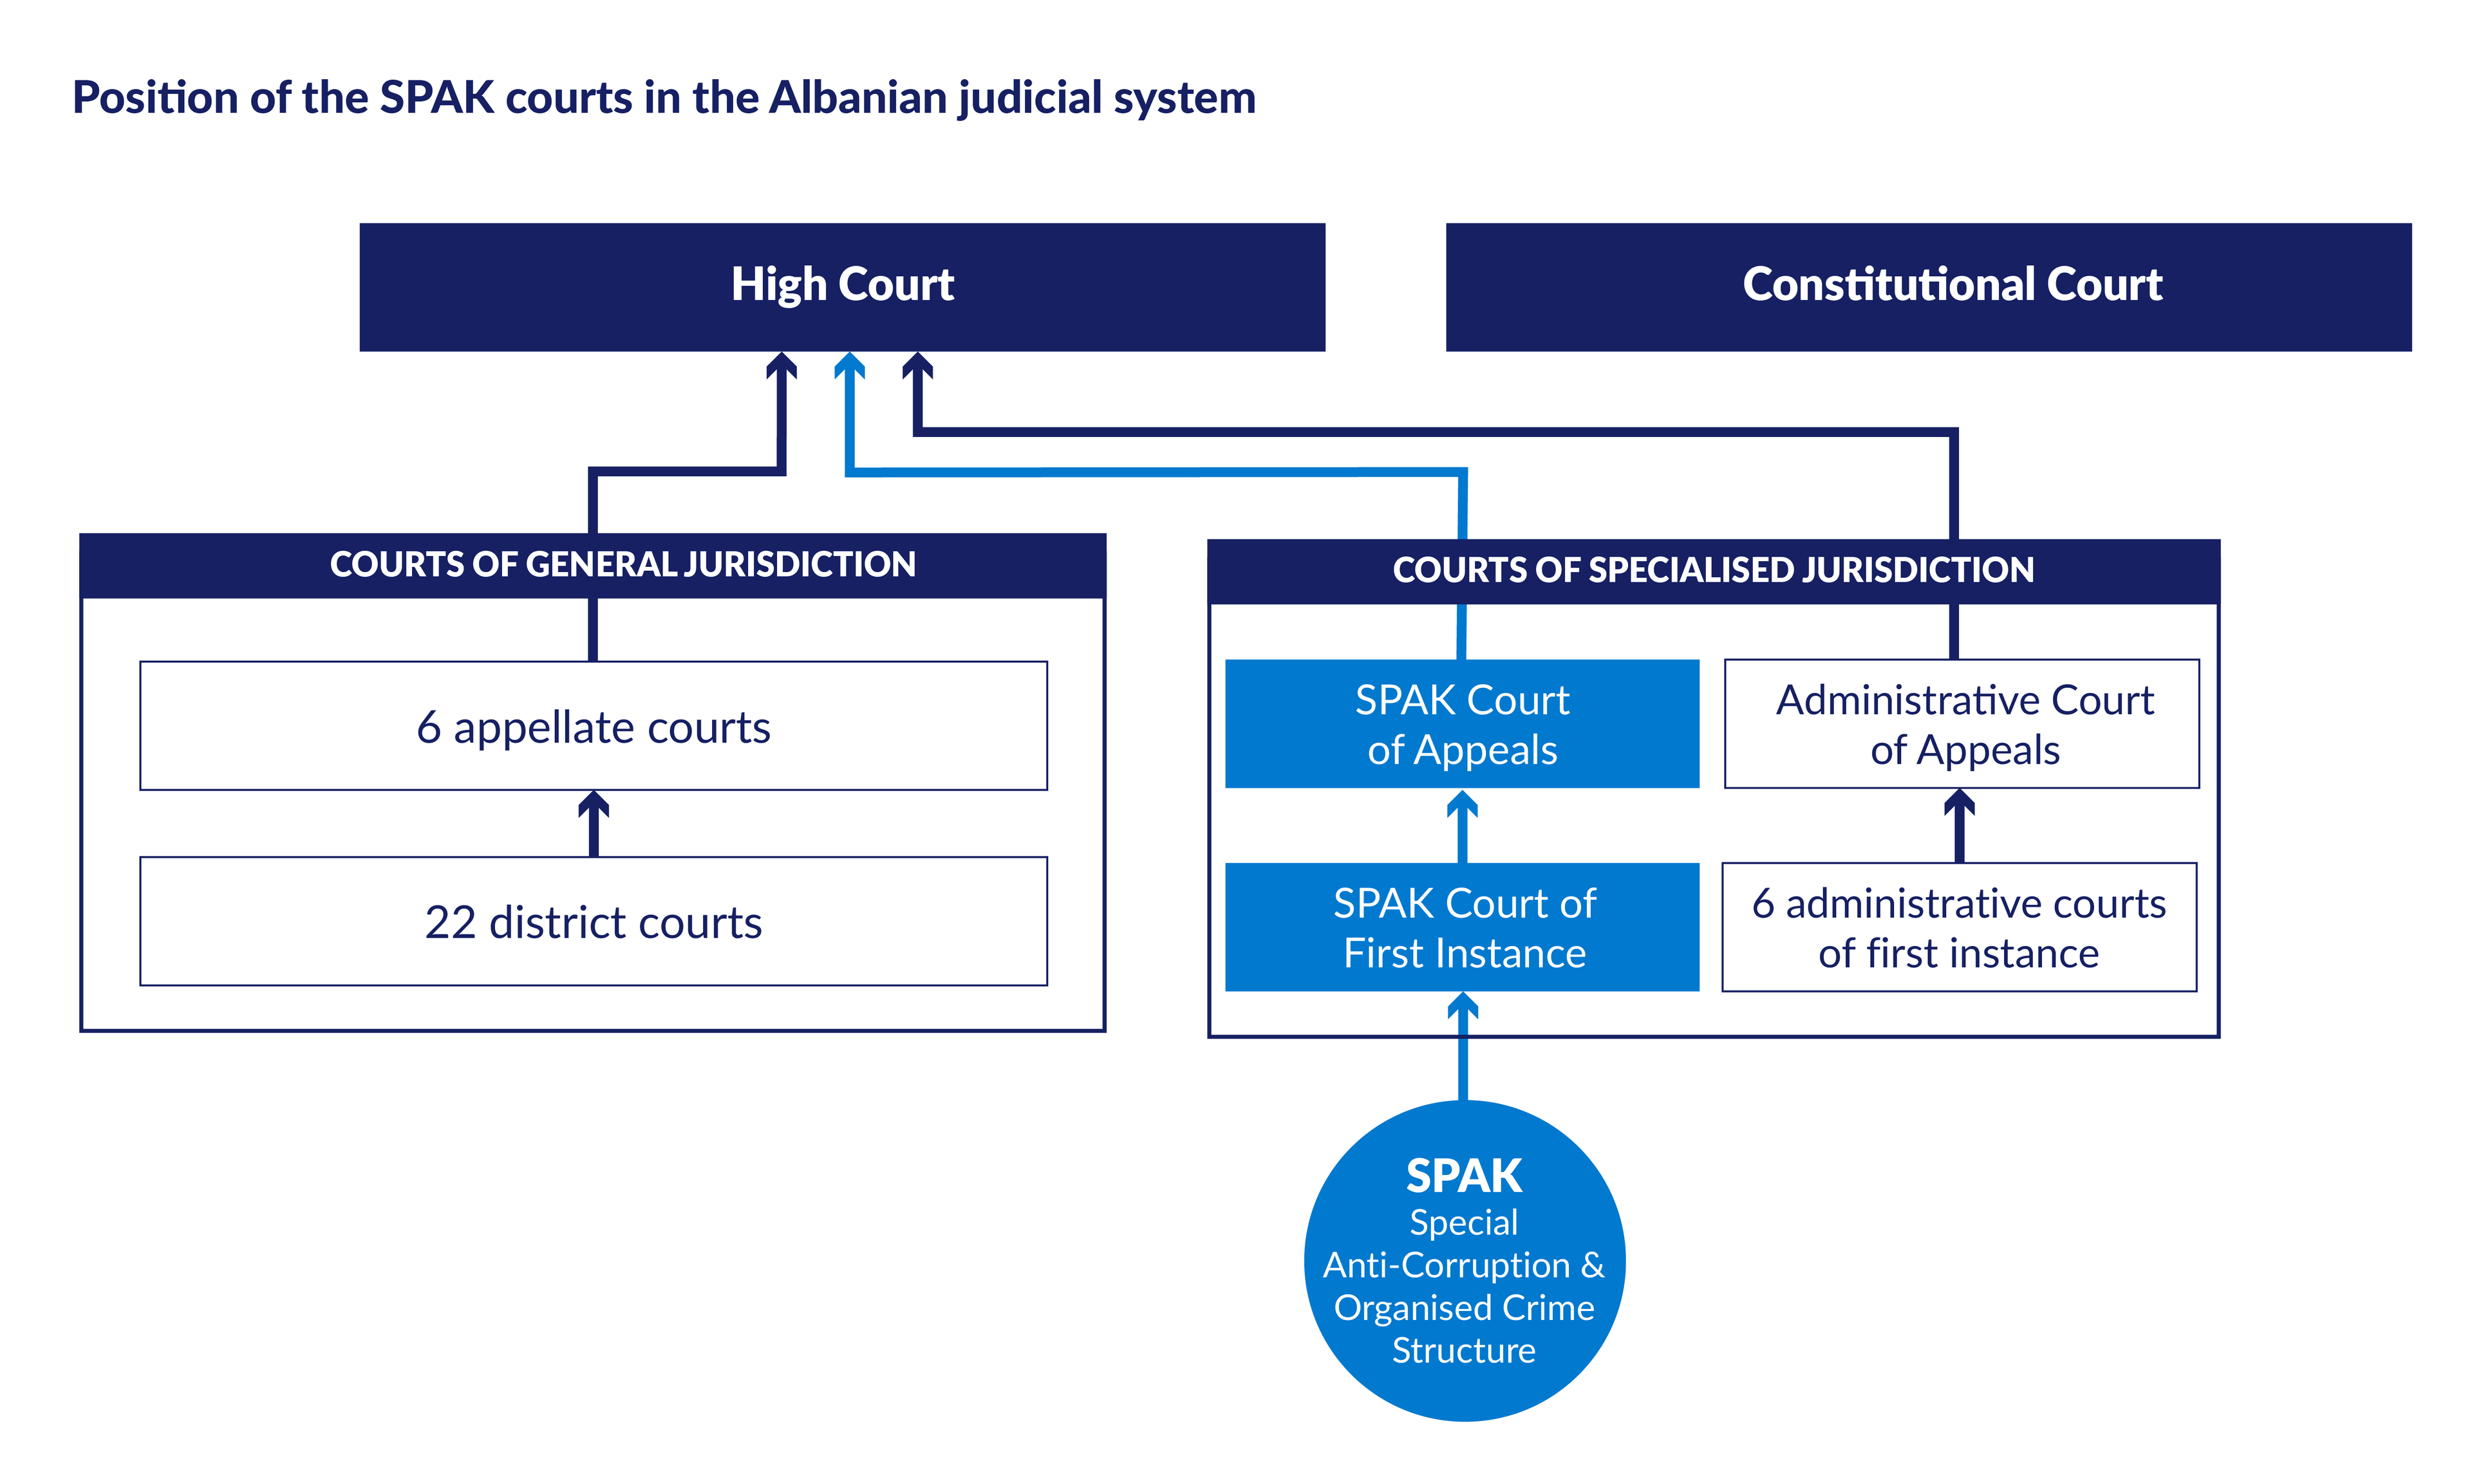 Diagram showing the position of the SPAK court in the Albanian judicial system